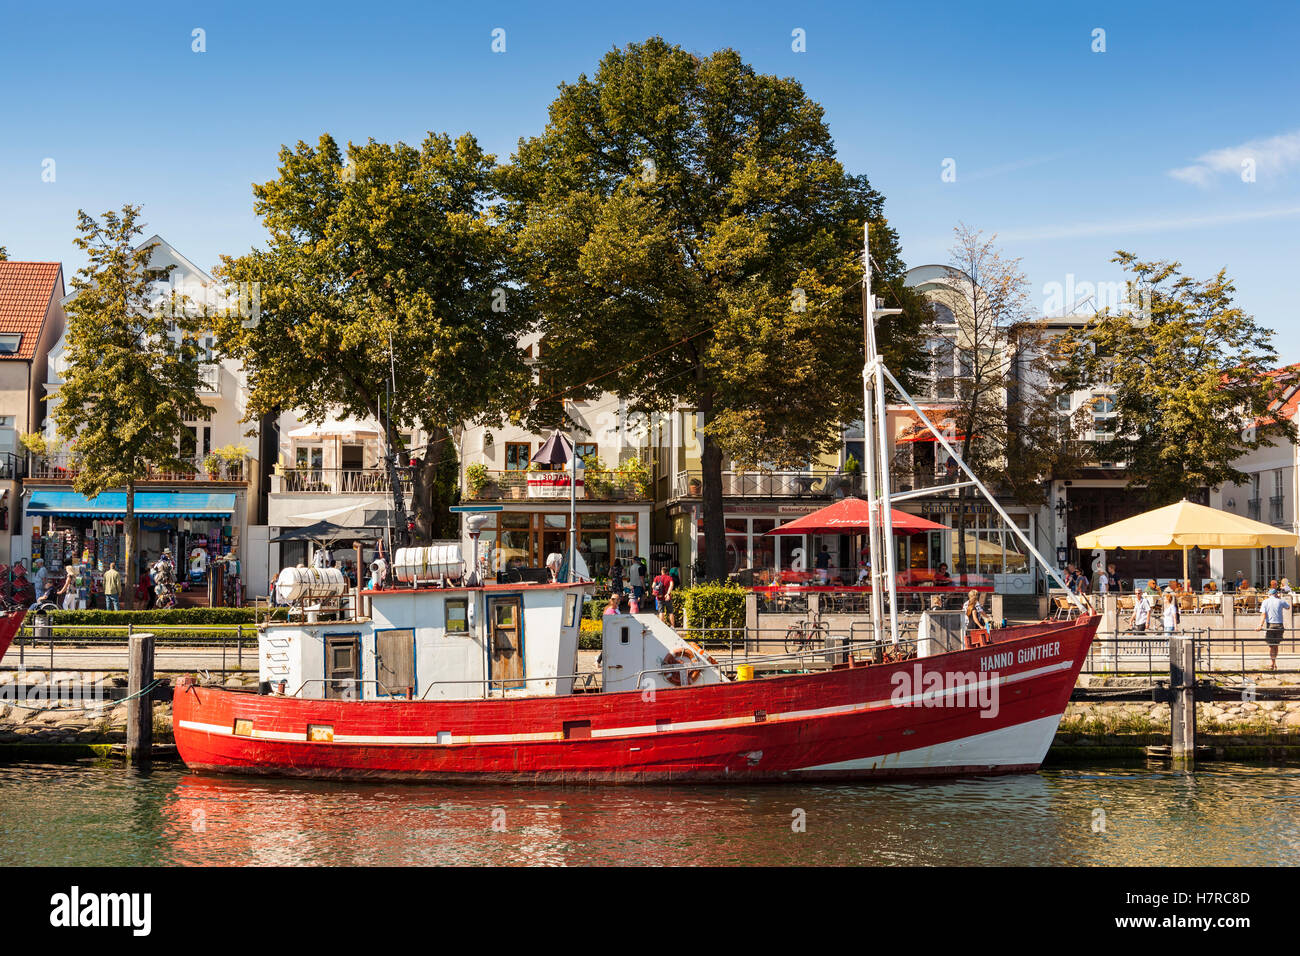 Fishing boat, the Hanno Gunther, Alter Strom Canal, and Am Strom Street, Warnemunde, Germany Stock Photo